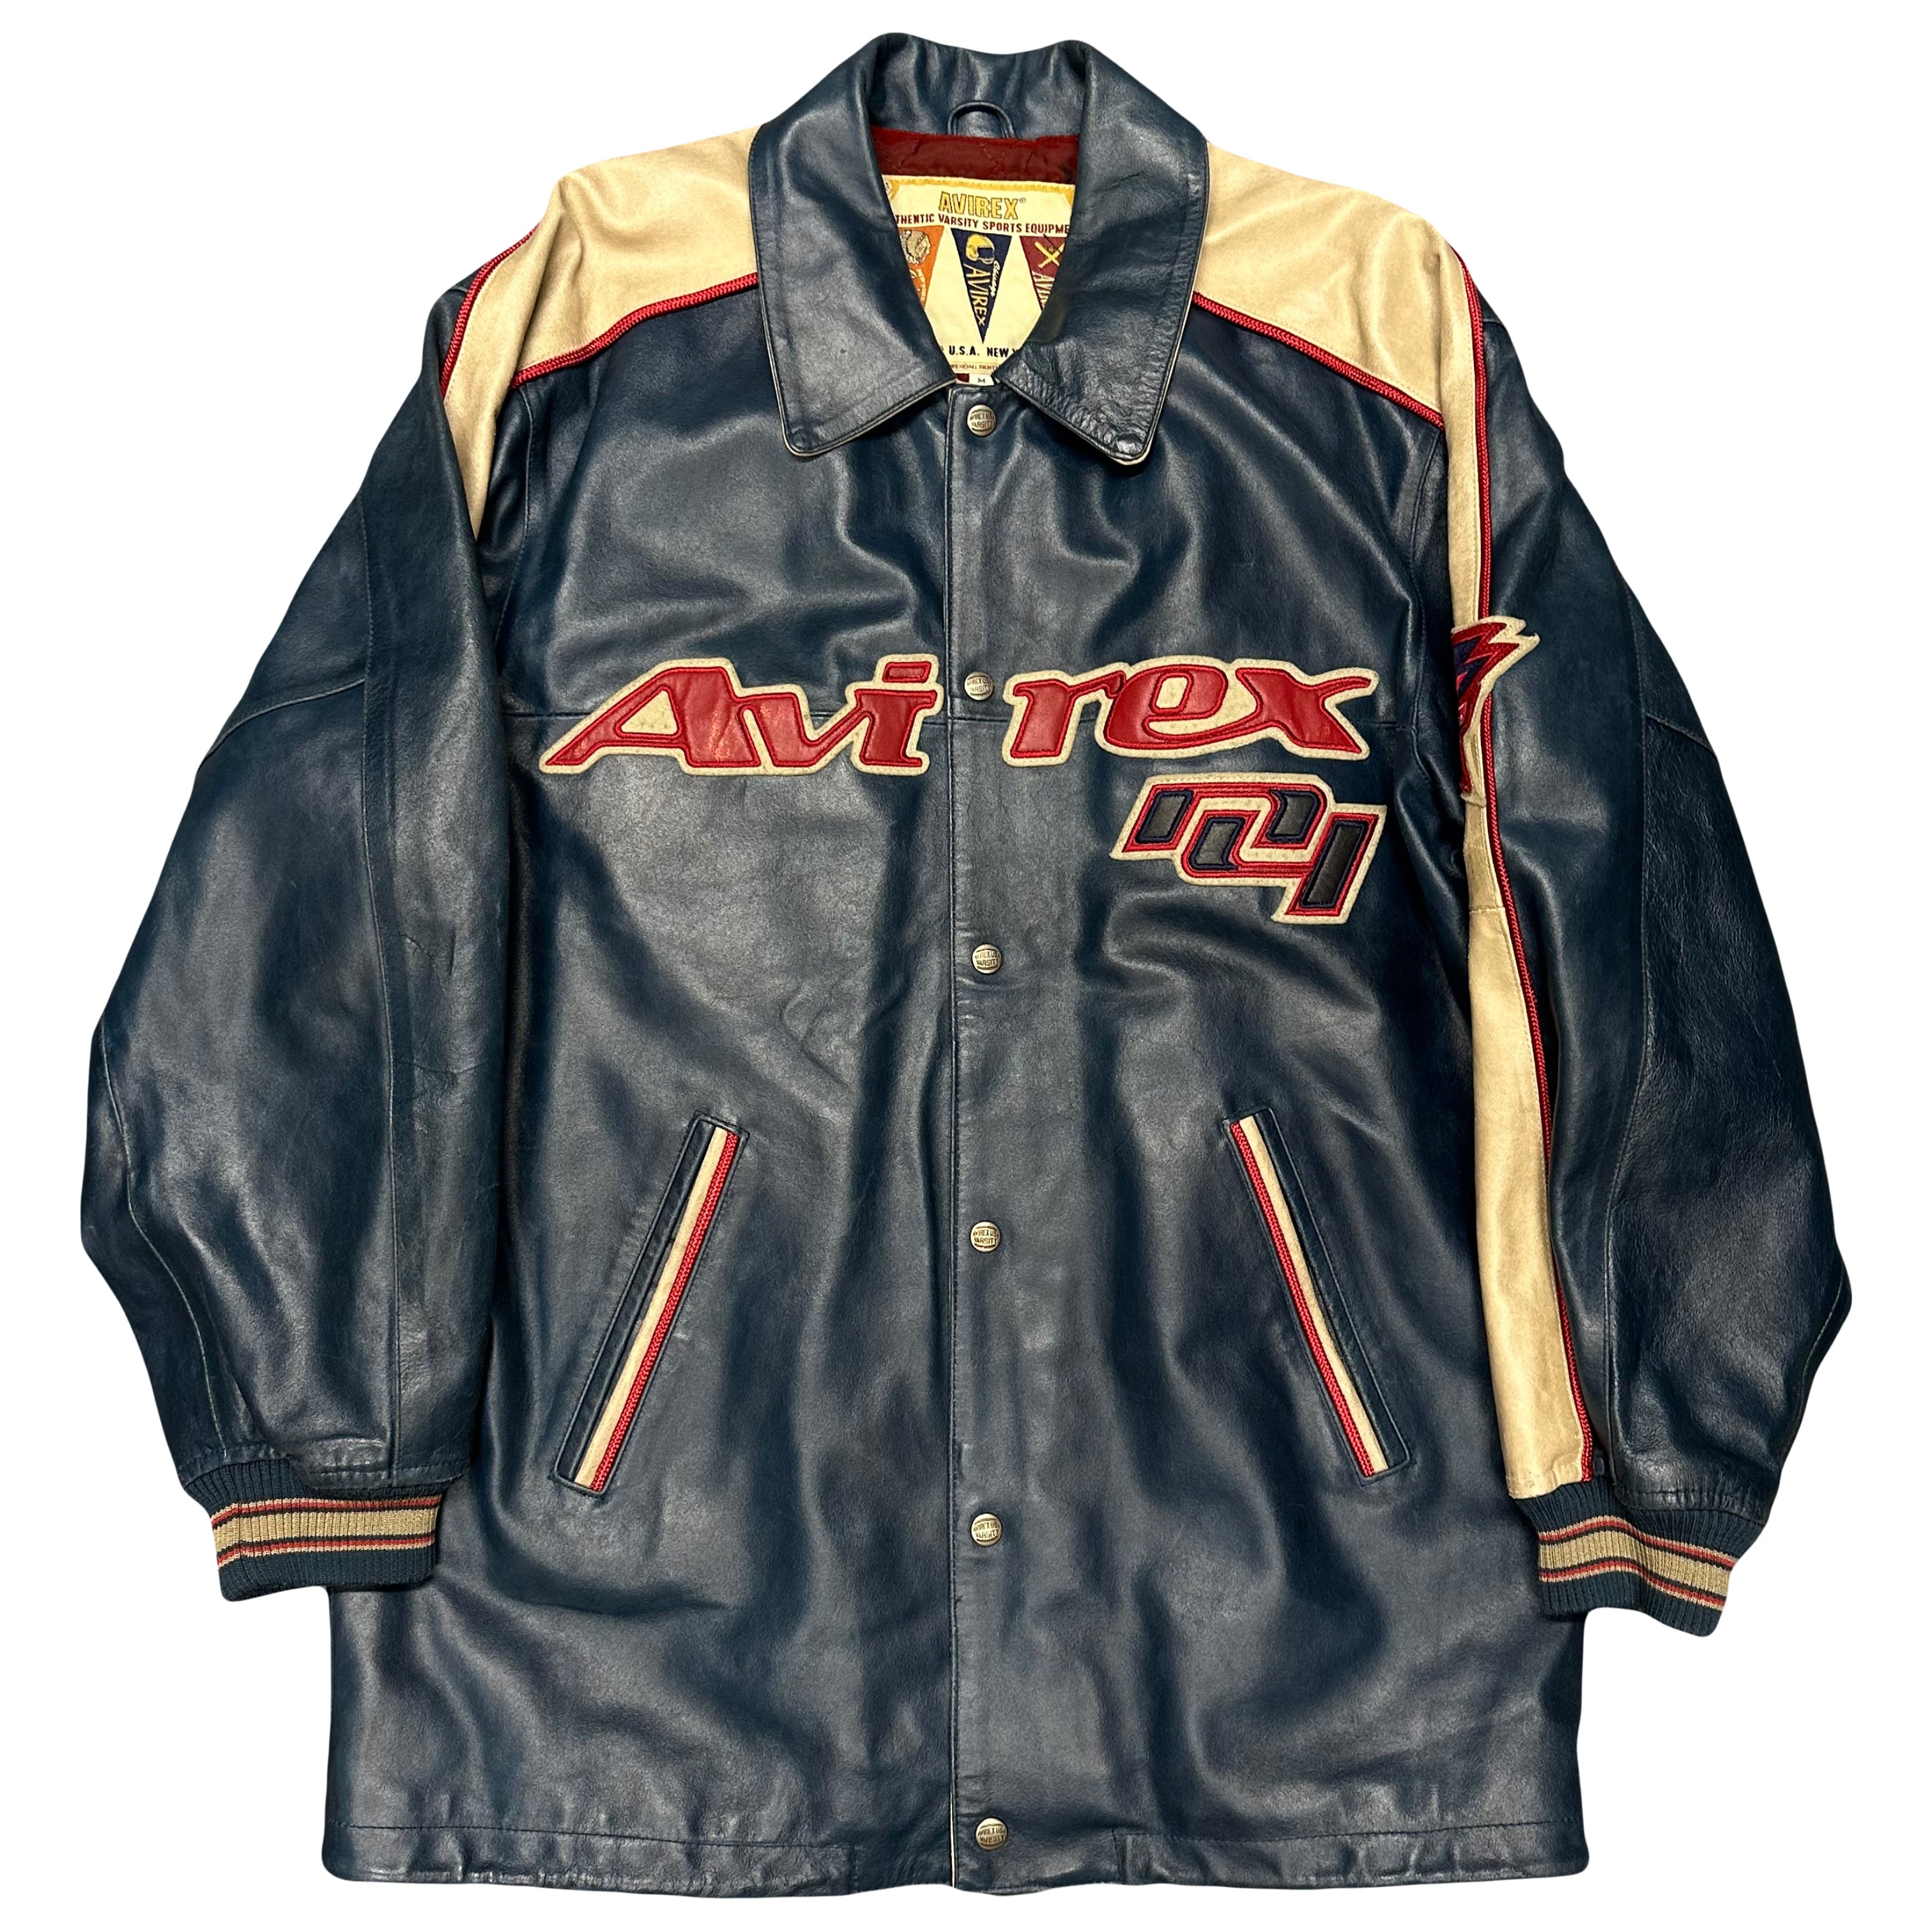 ARCHIVE Avirex ‘All Star Goalers’ Long Leather Jacket In Navy ( M )